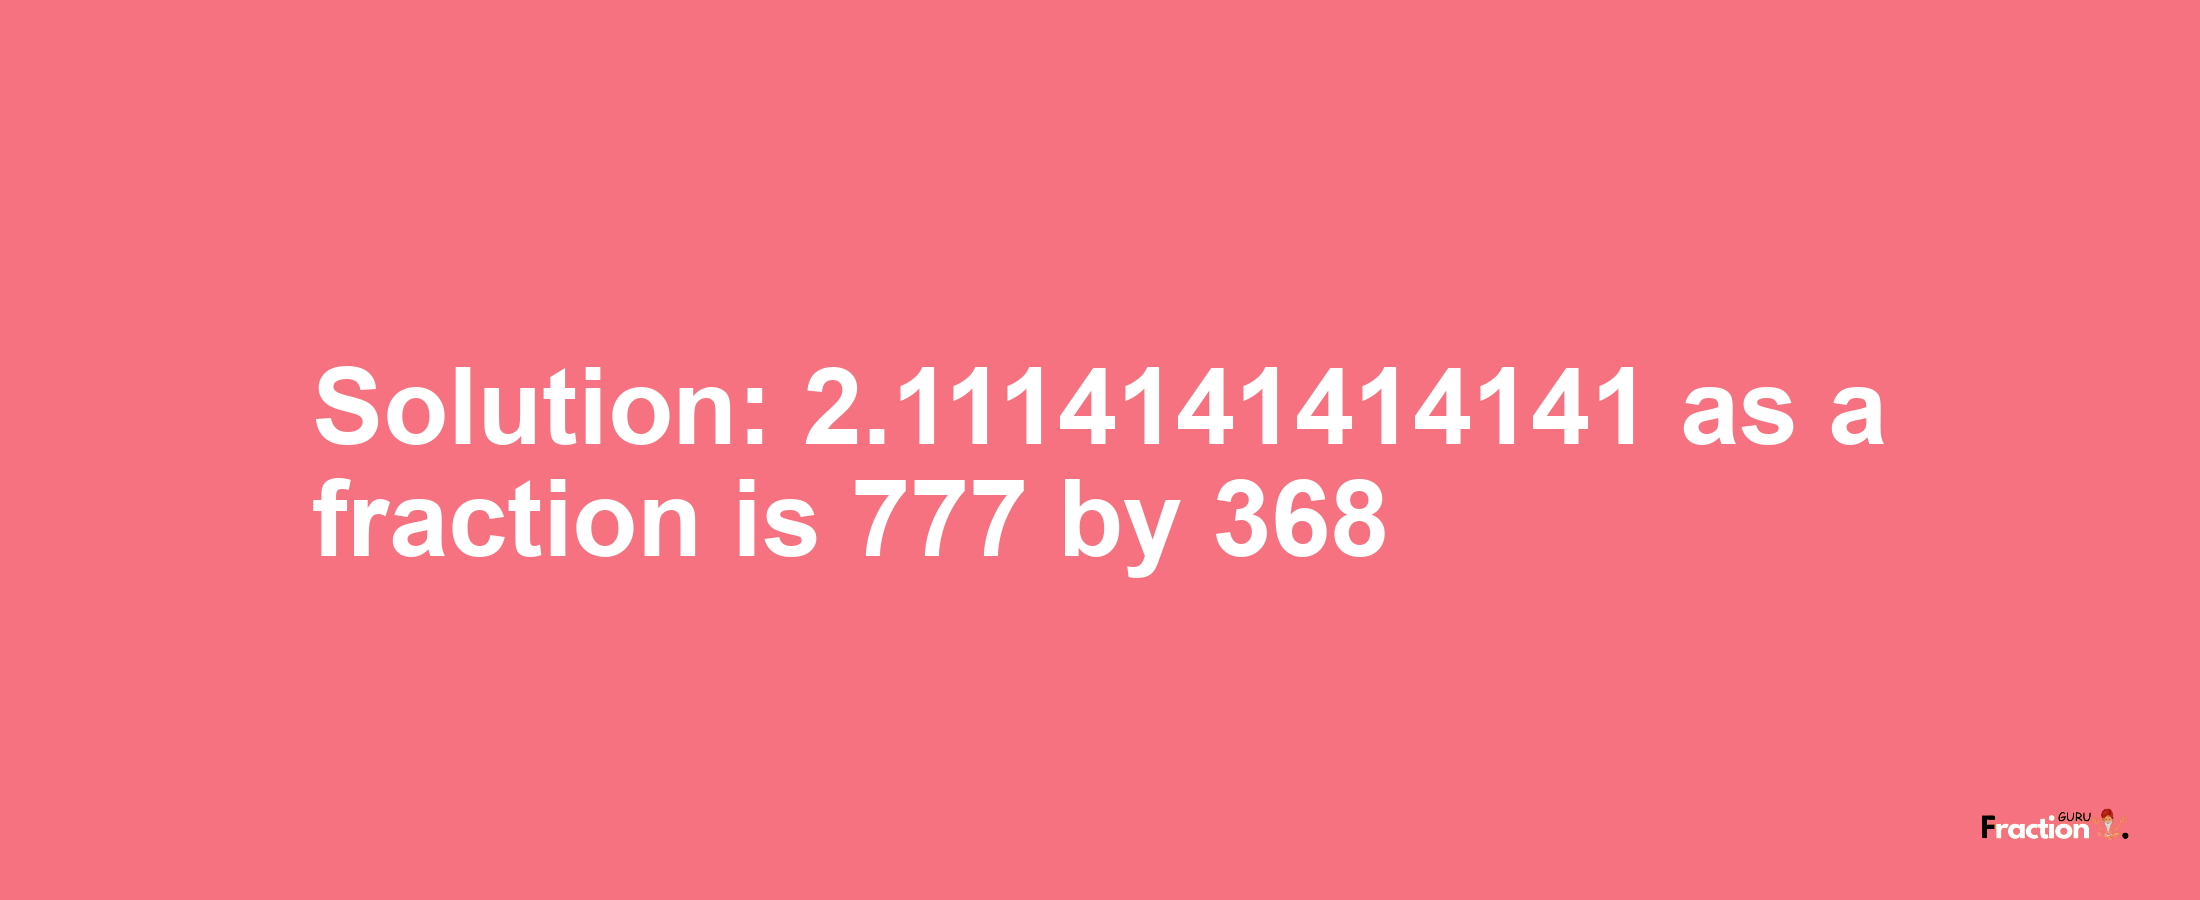 Solution:2.1114141414141 as a fraction is 777/368